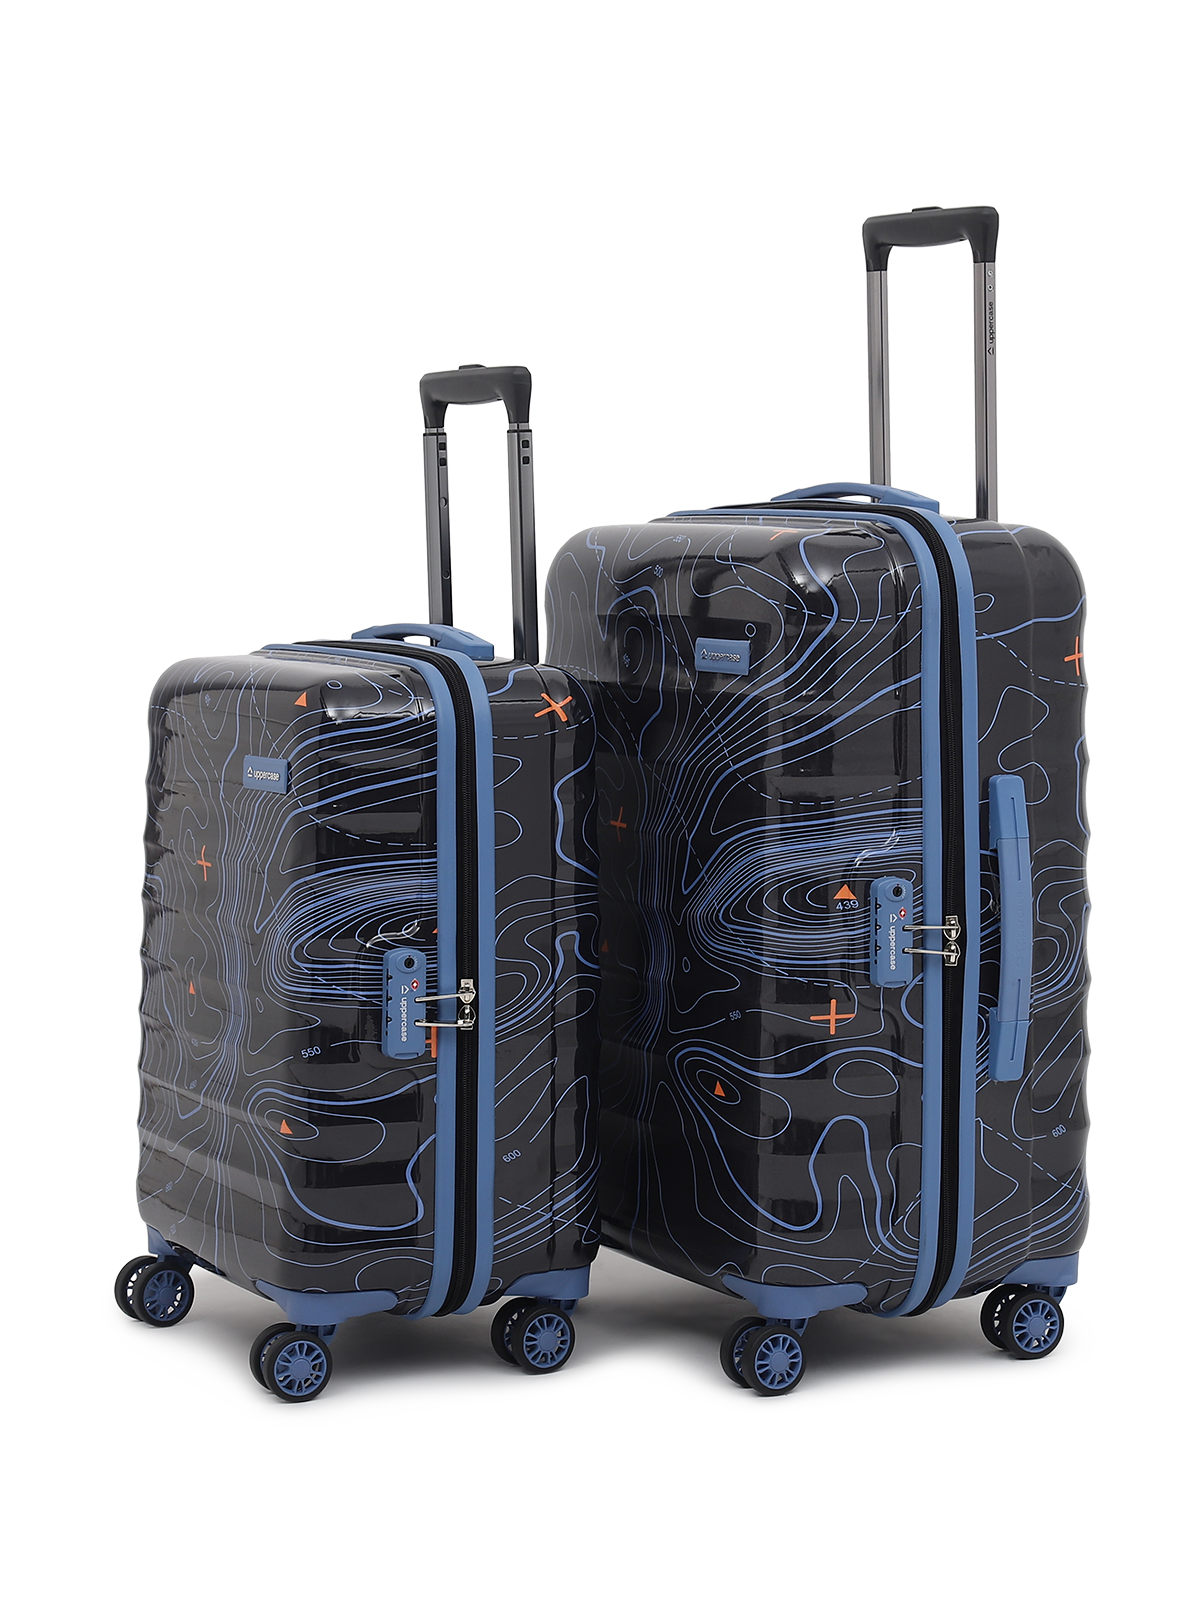 3 PCS Luggage Set Softside Suitcase Carry On Rolling Trolley Spinner  Expandable | eBay